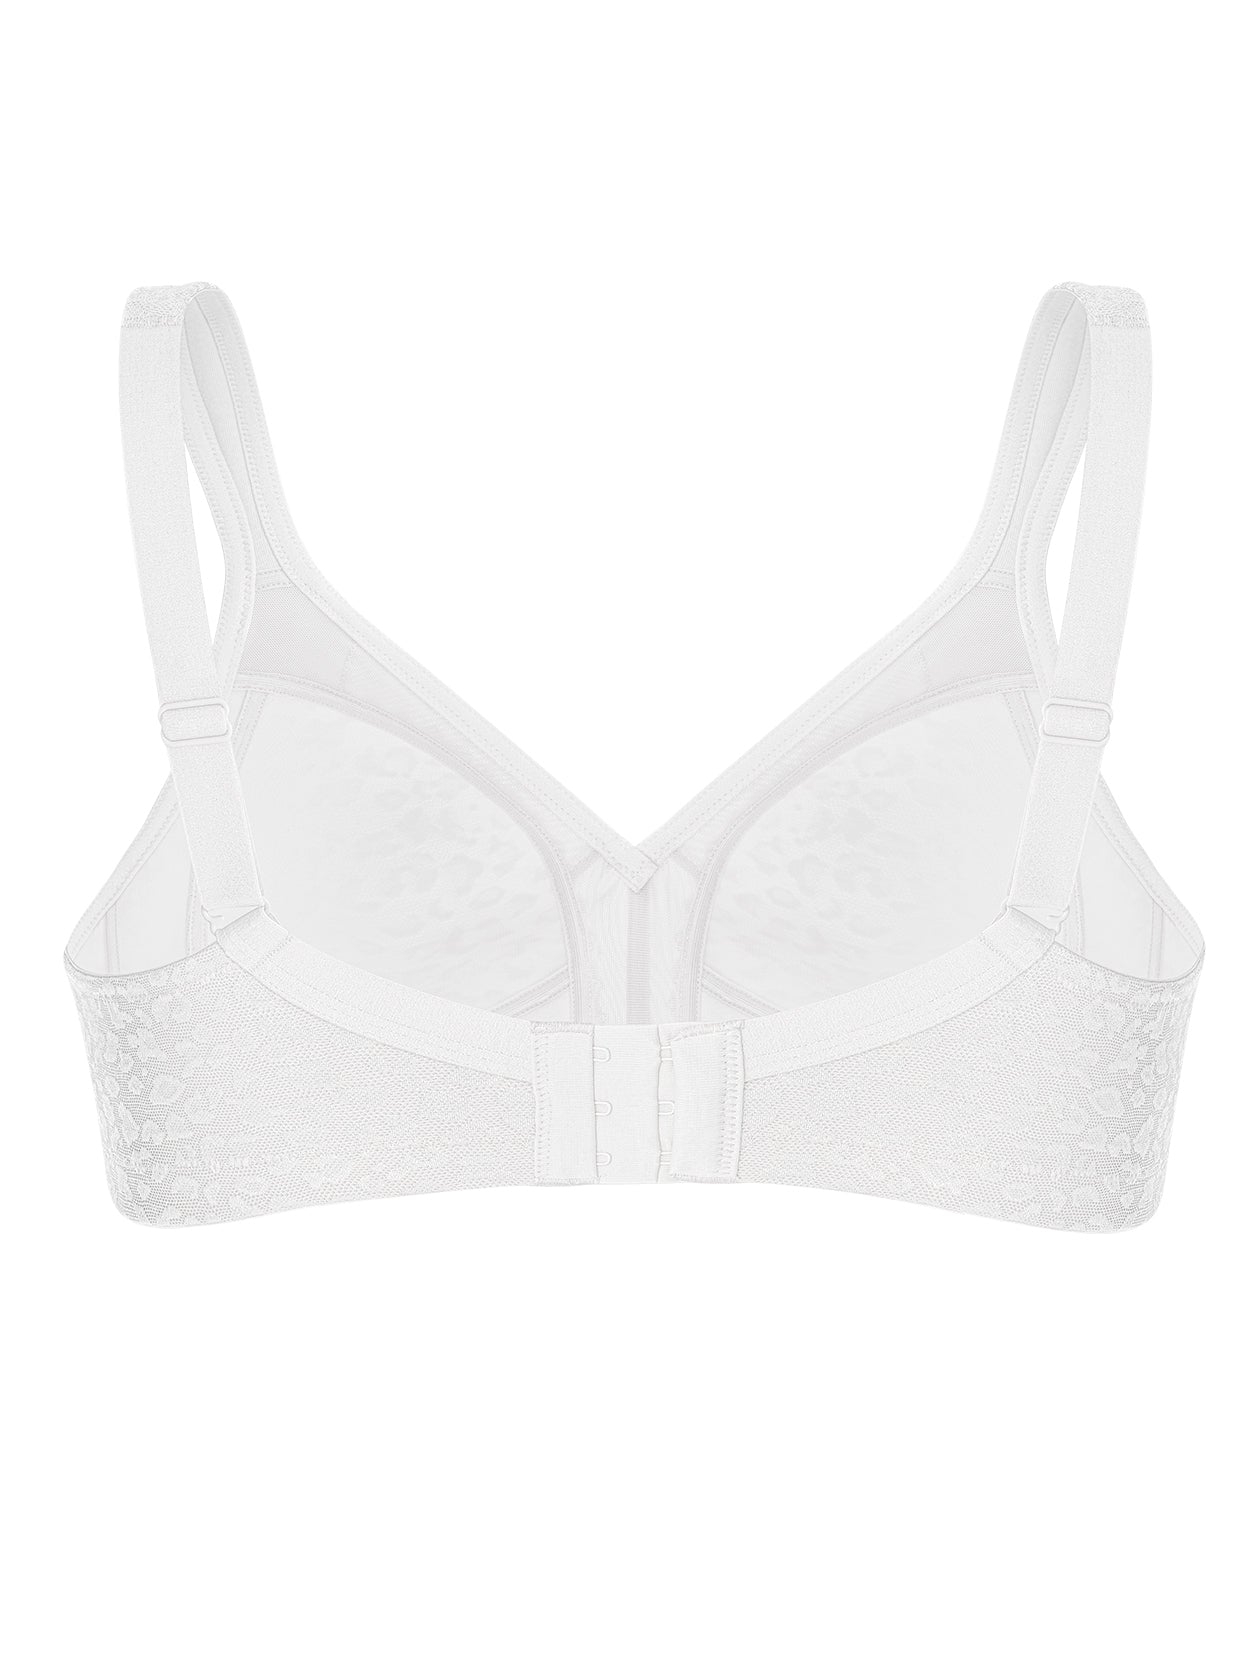 FASHION BONES Pure Cotton White Broad Straps Full Coverage Double Layered  Bra for Heavy Bust Women and Girls/Non Padded/Wire Free